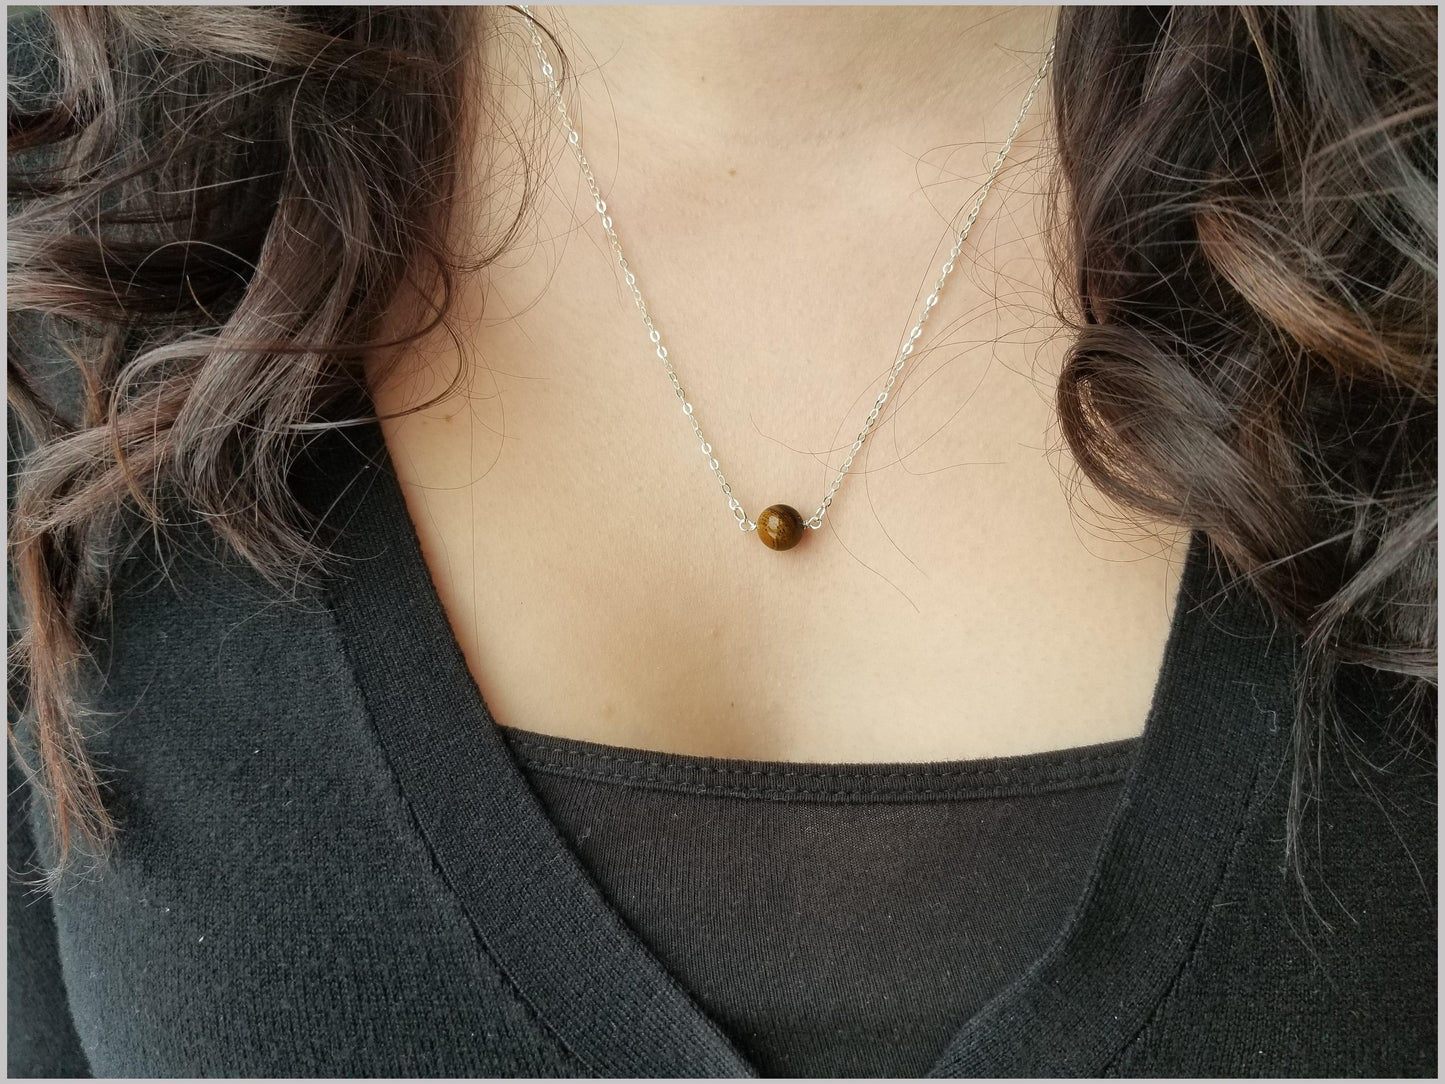 Natural Tigers Eye Bead Necklace